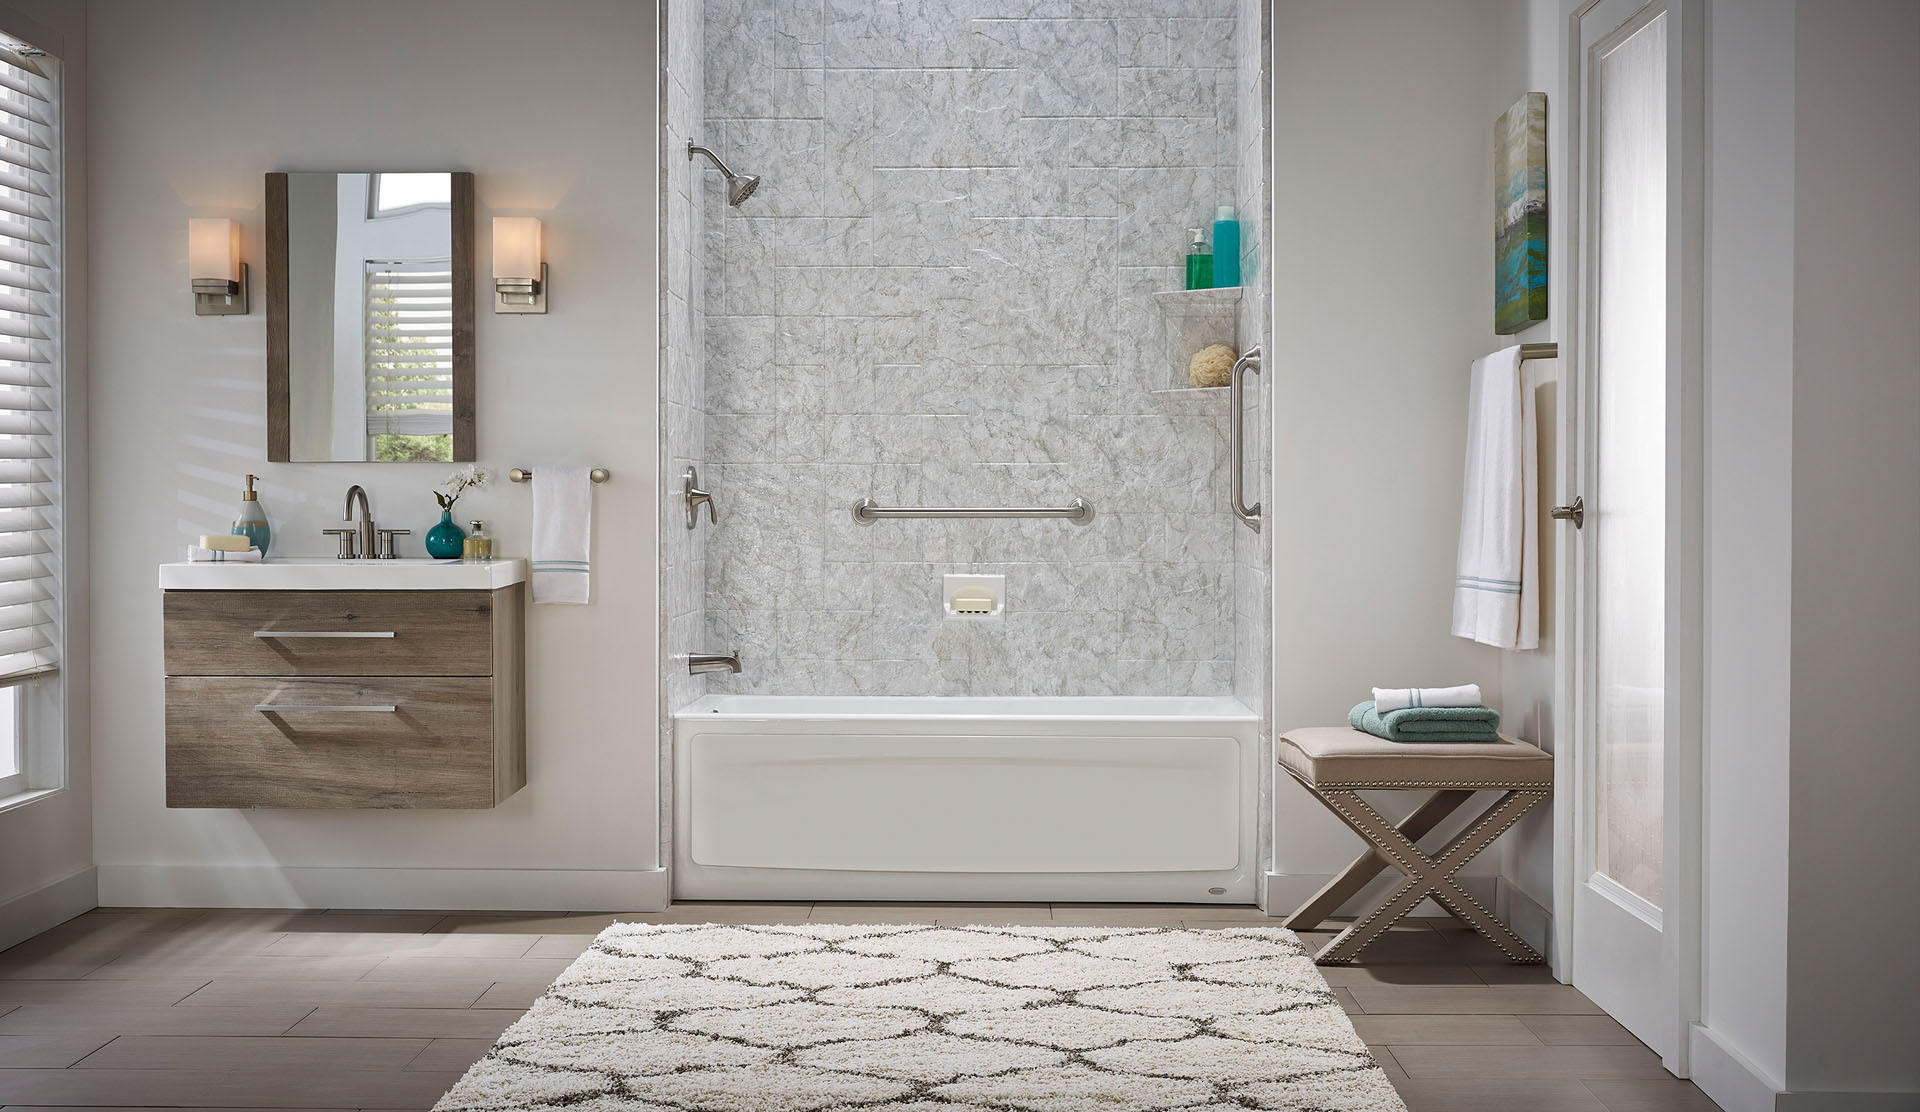 A beautiful bathroom has a bathtub and shower combination with gray textured tile walls.